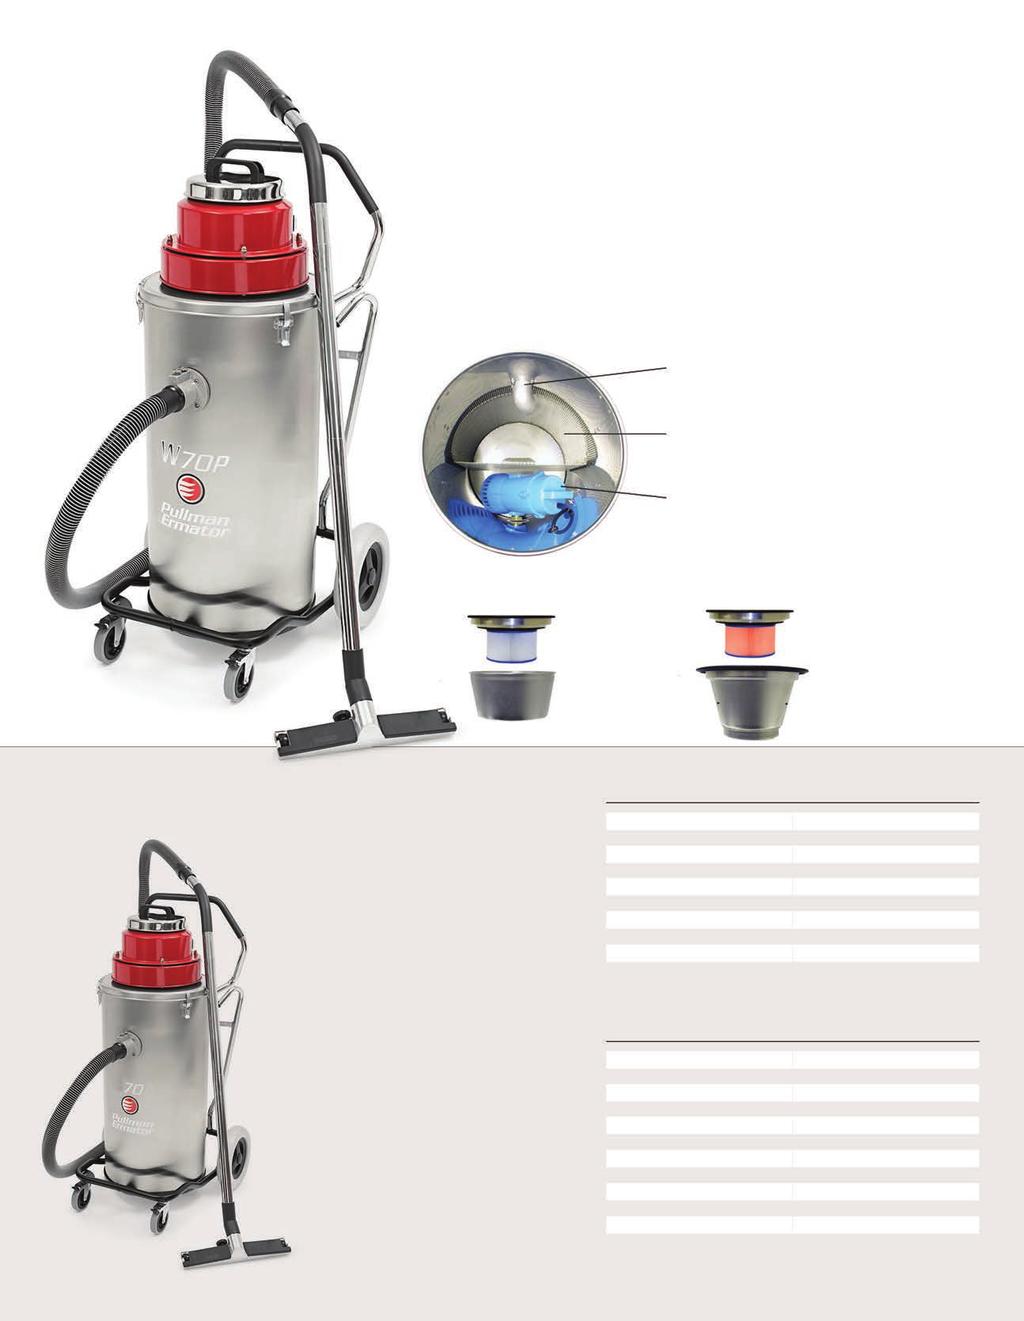 W70 Wet Vacuum and W70P Slurry Vacuum w/pump These 15 gallon wet vacuums are known for their quality, durability, efficiency and long, trouble-free service life.